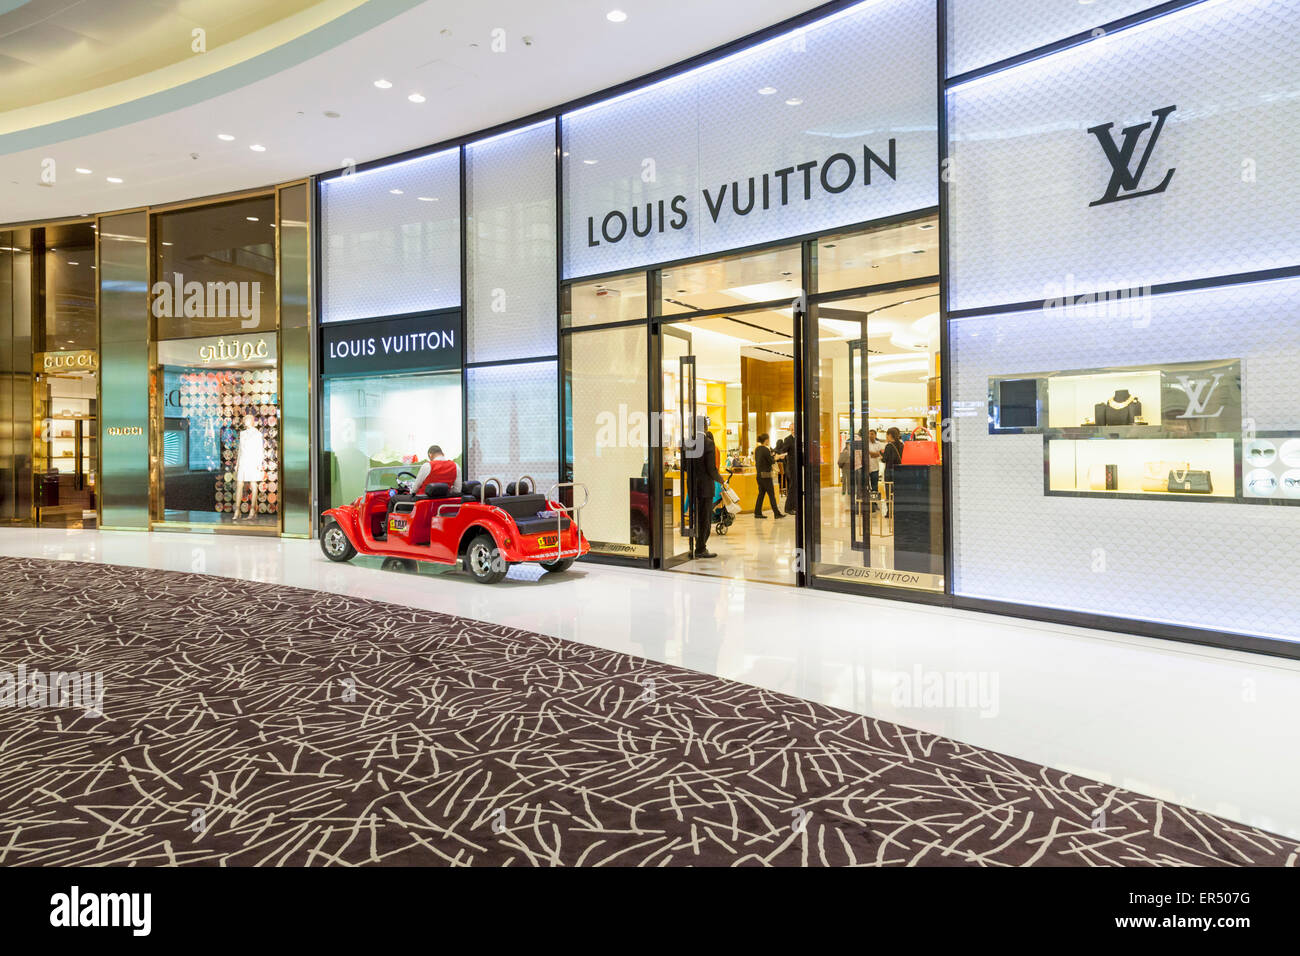 Price Of Louis Vuitton Shoes In Dubai | Jaguar Clubs of North America